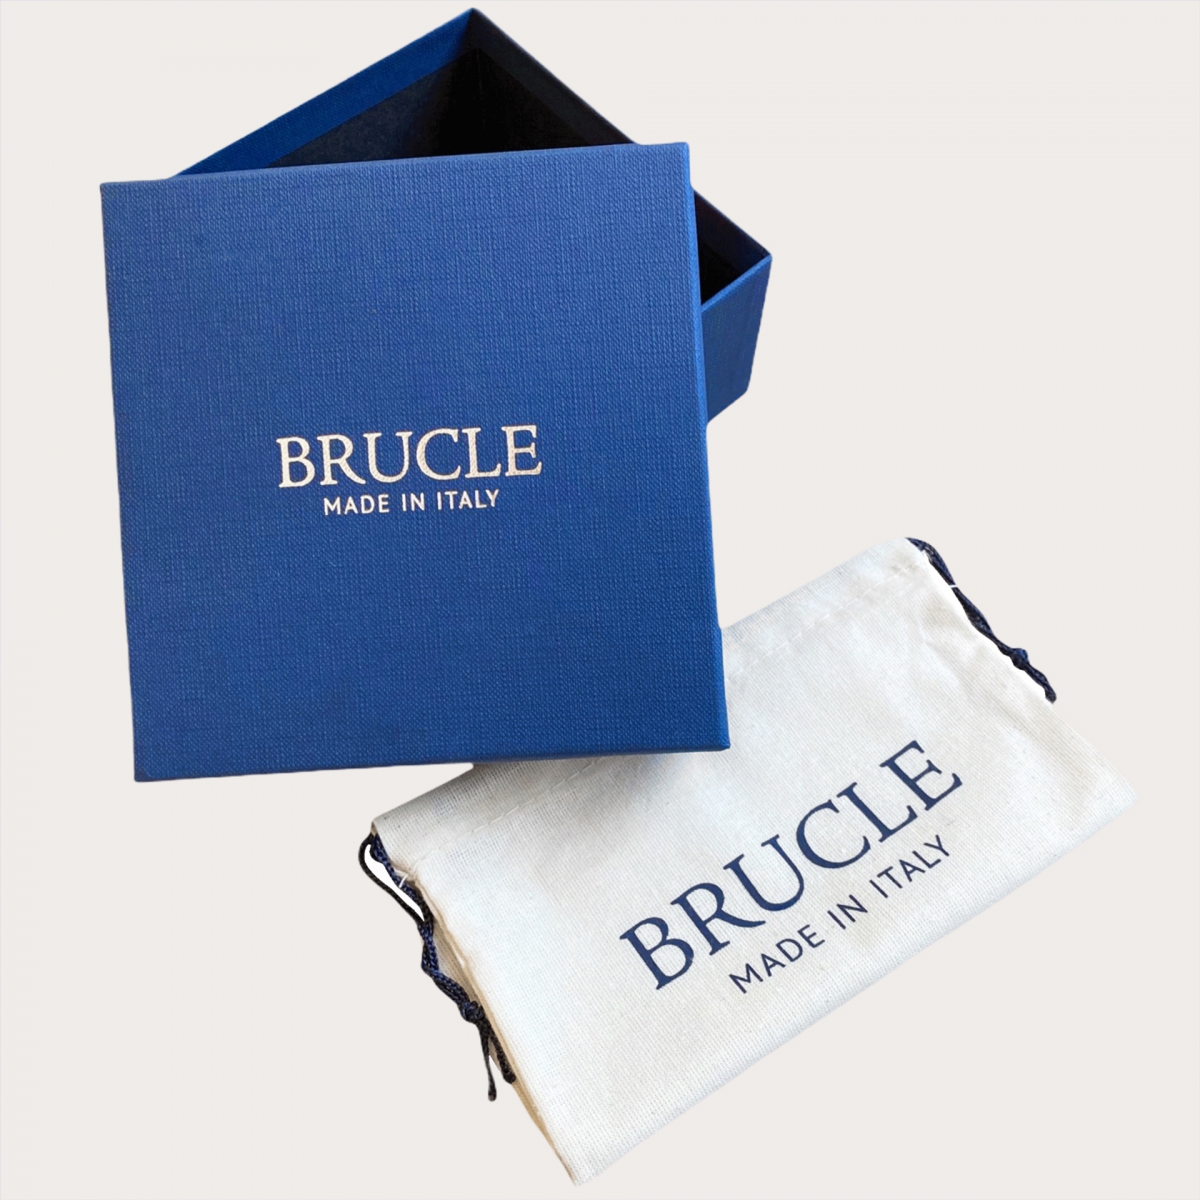 BRUCLE Casual belt in genuine leather, royal blue